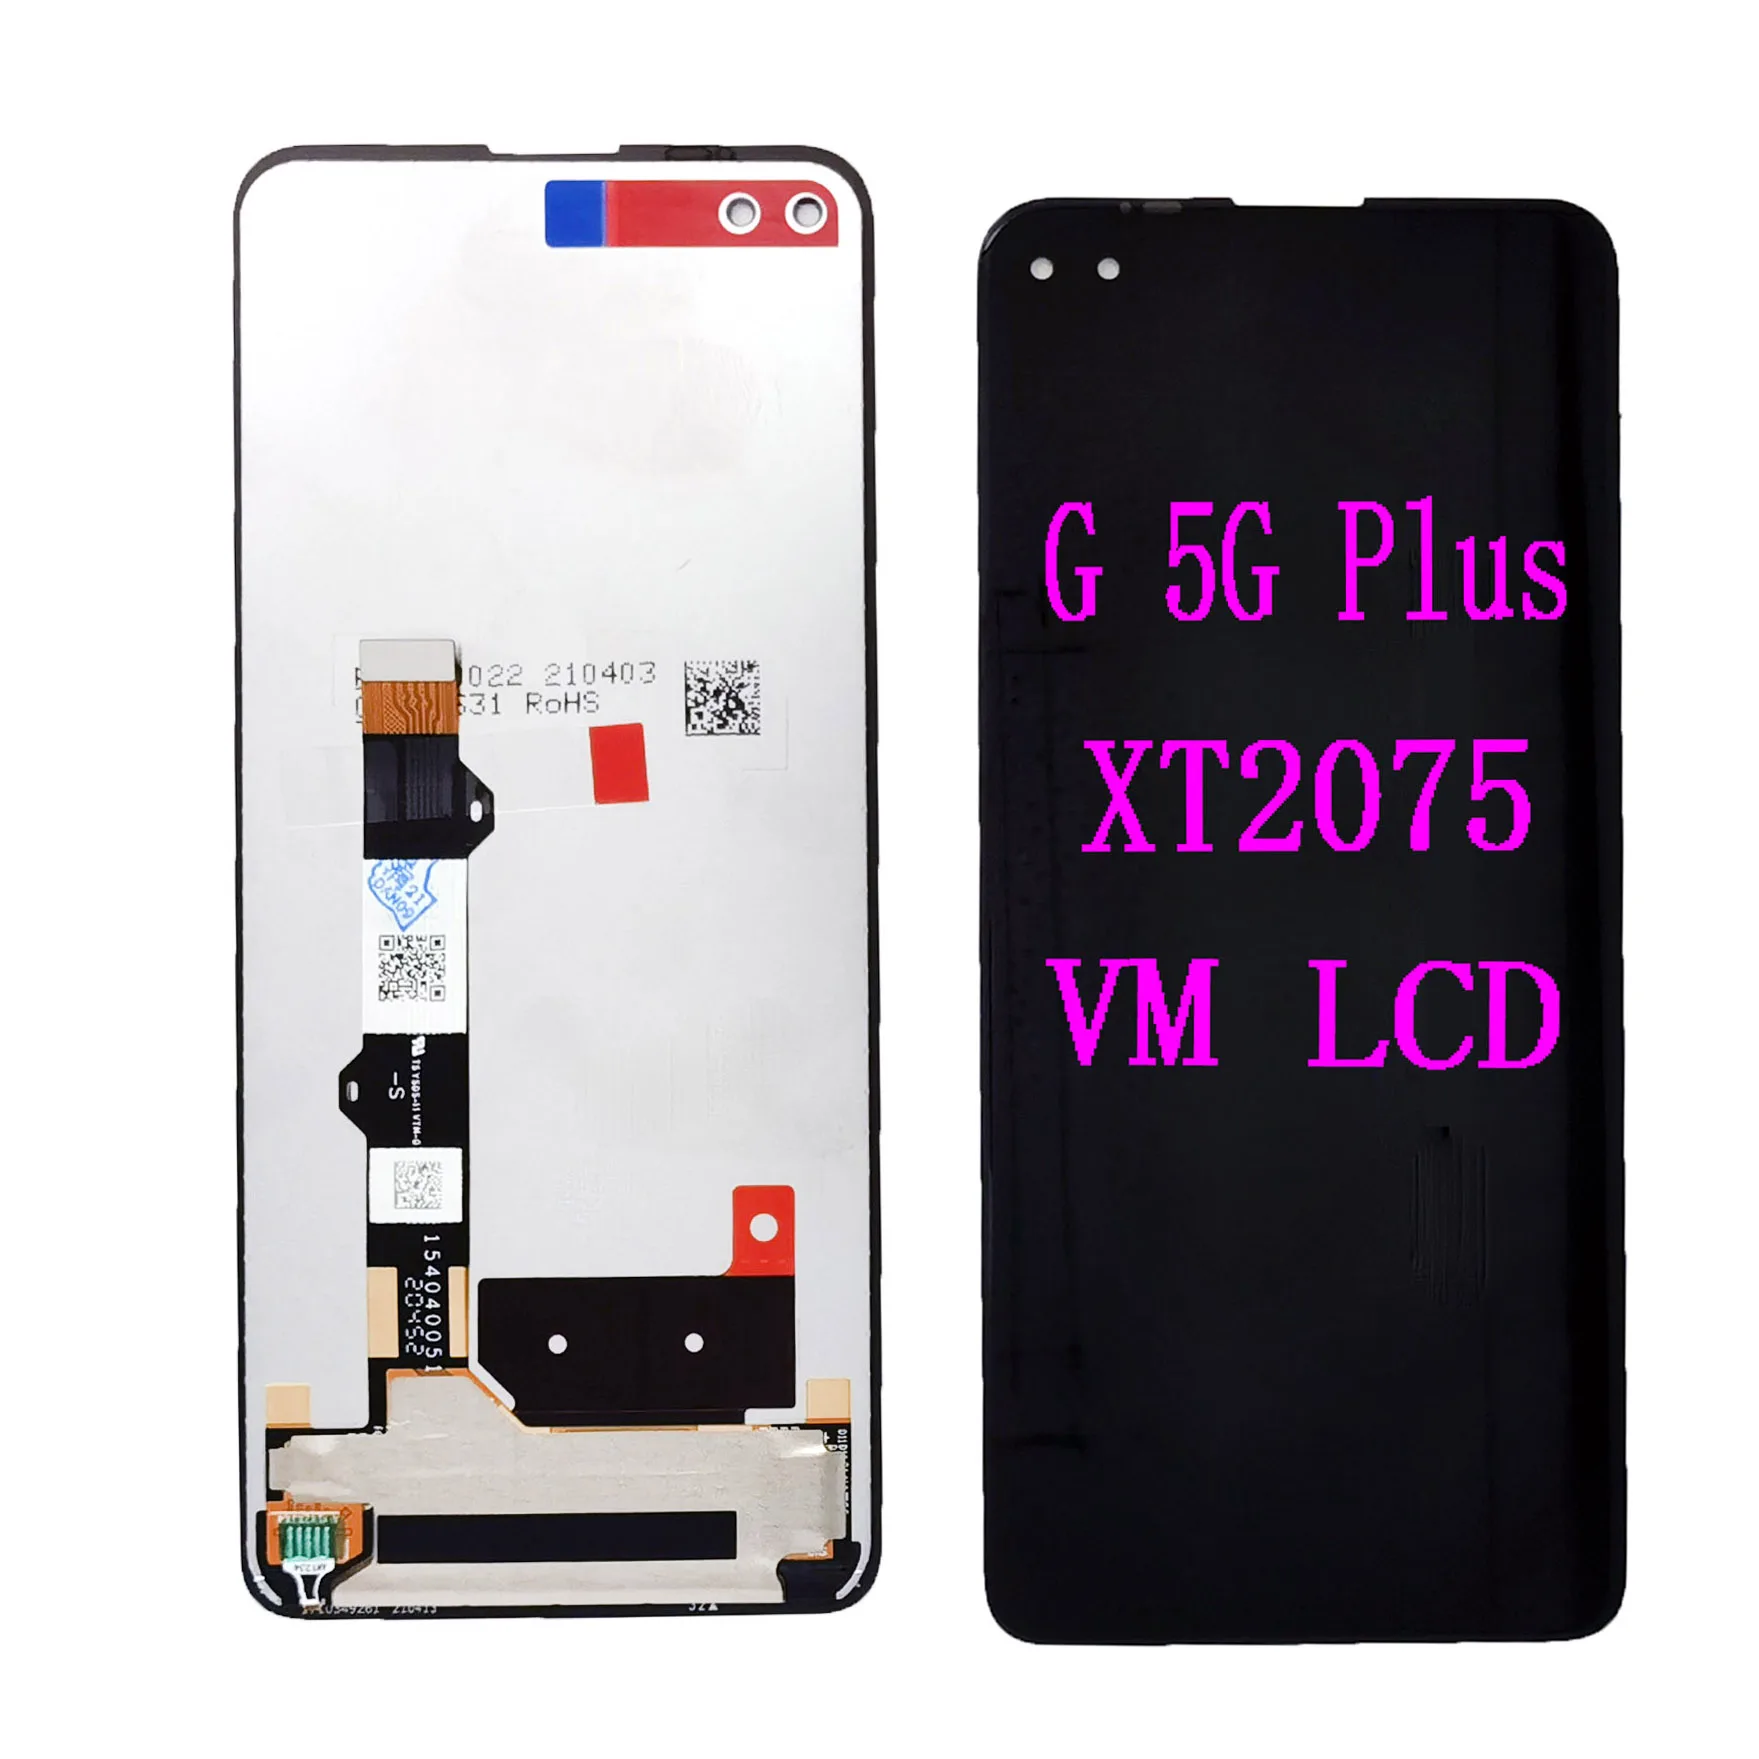 jaloezie stil Il Phones Accessories Wholesales Lcd Screen Digitizer For Motorola Moto G 5g  Plus Display Replacement - Buy Lcd Manufacturer For Motorola Moto G 5g Plus,Mobile  Phones Lcds Screen For Motorola Moto G 5g